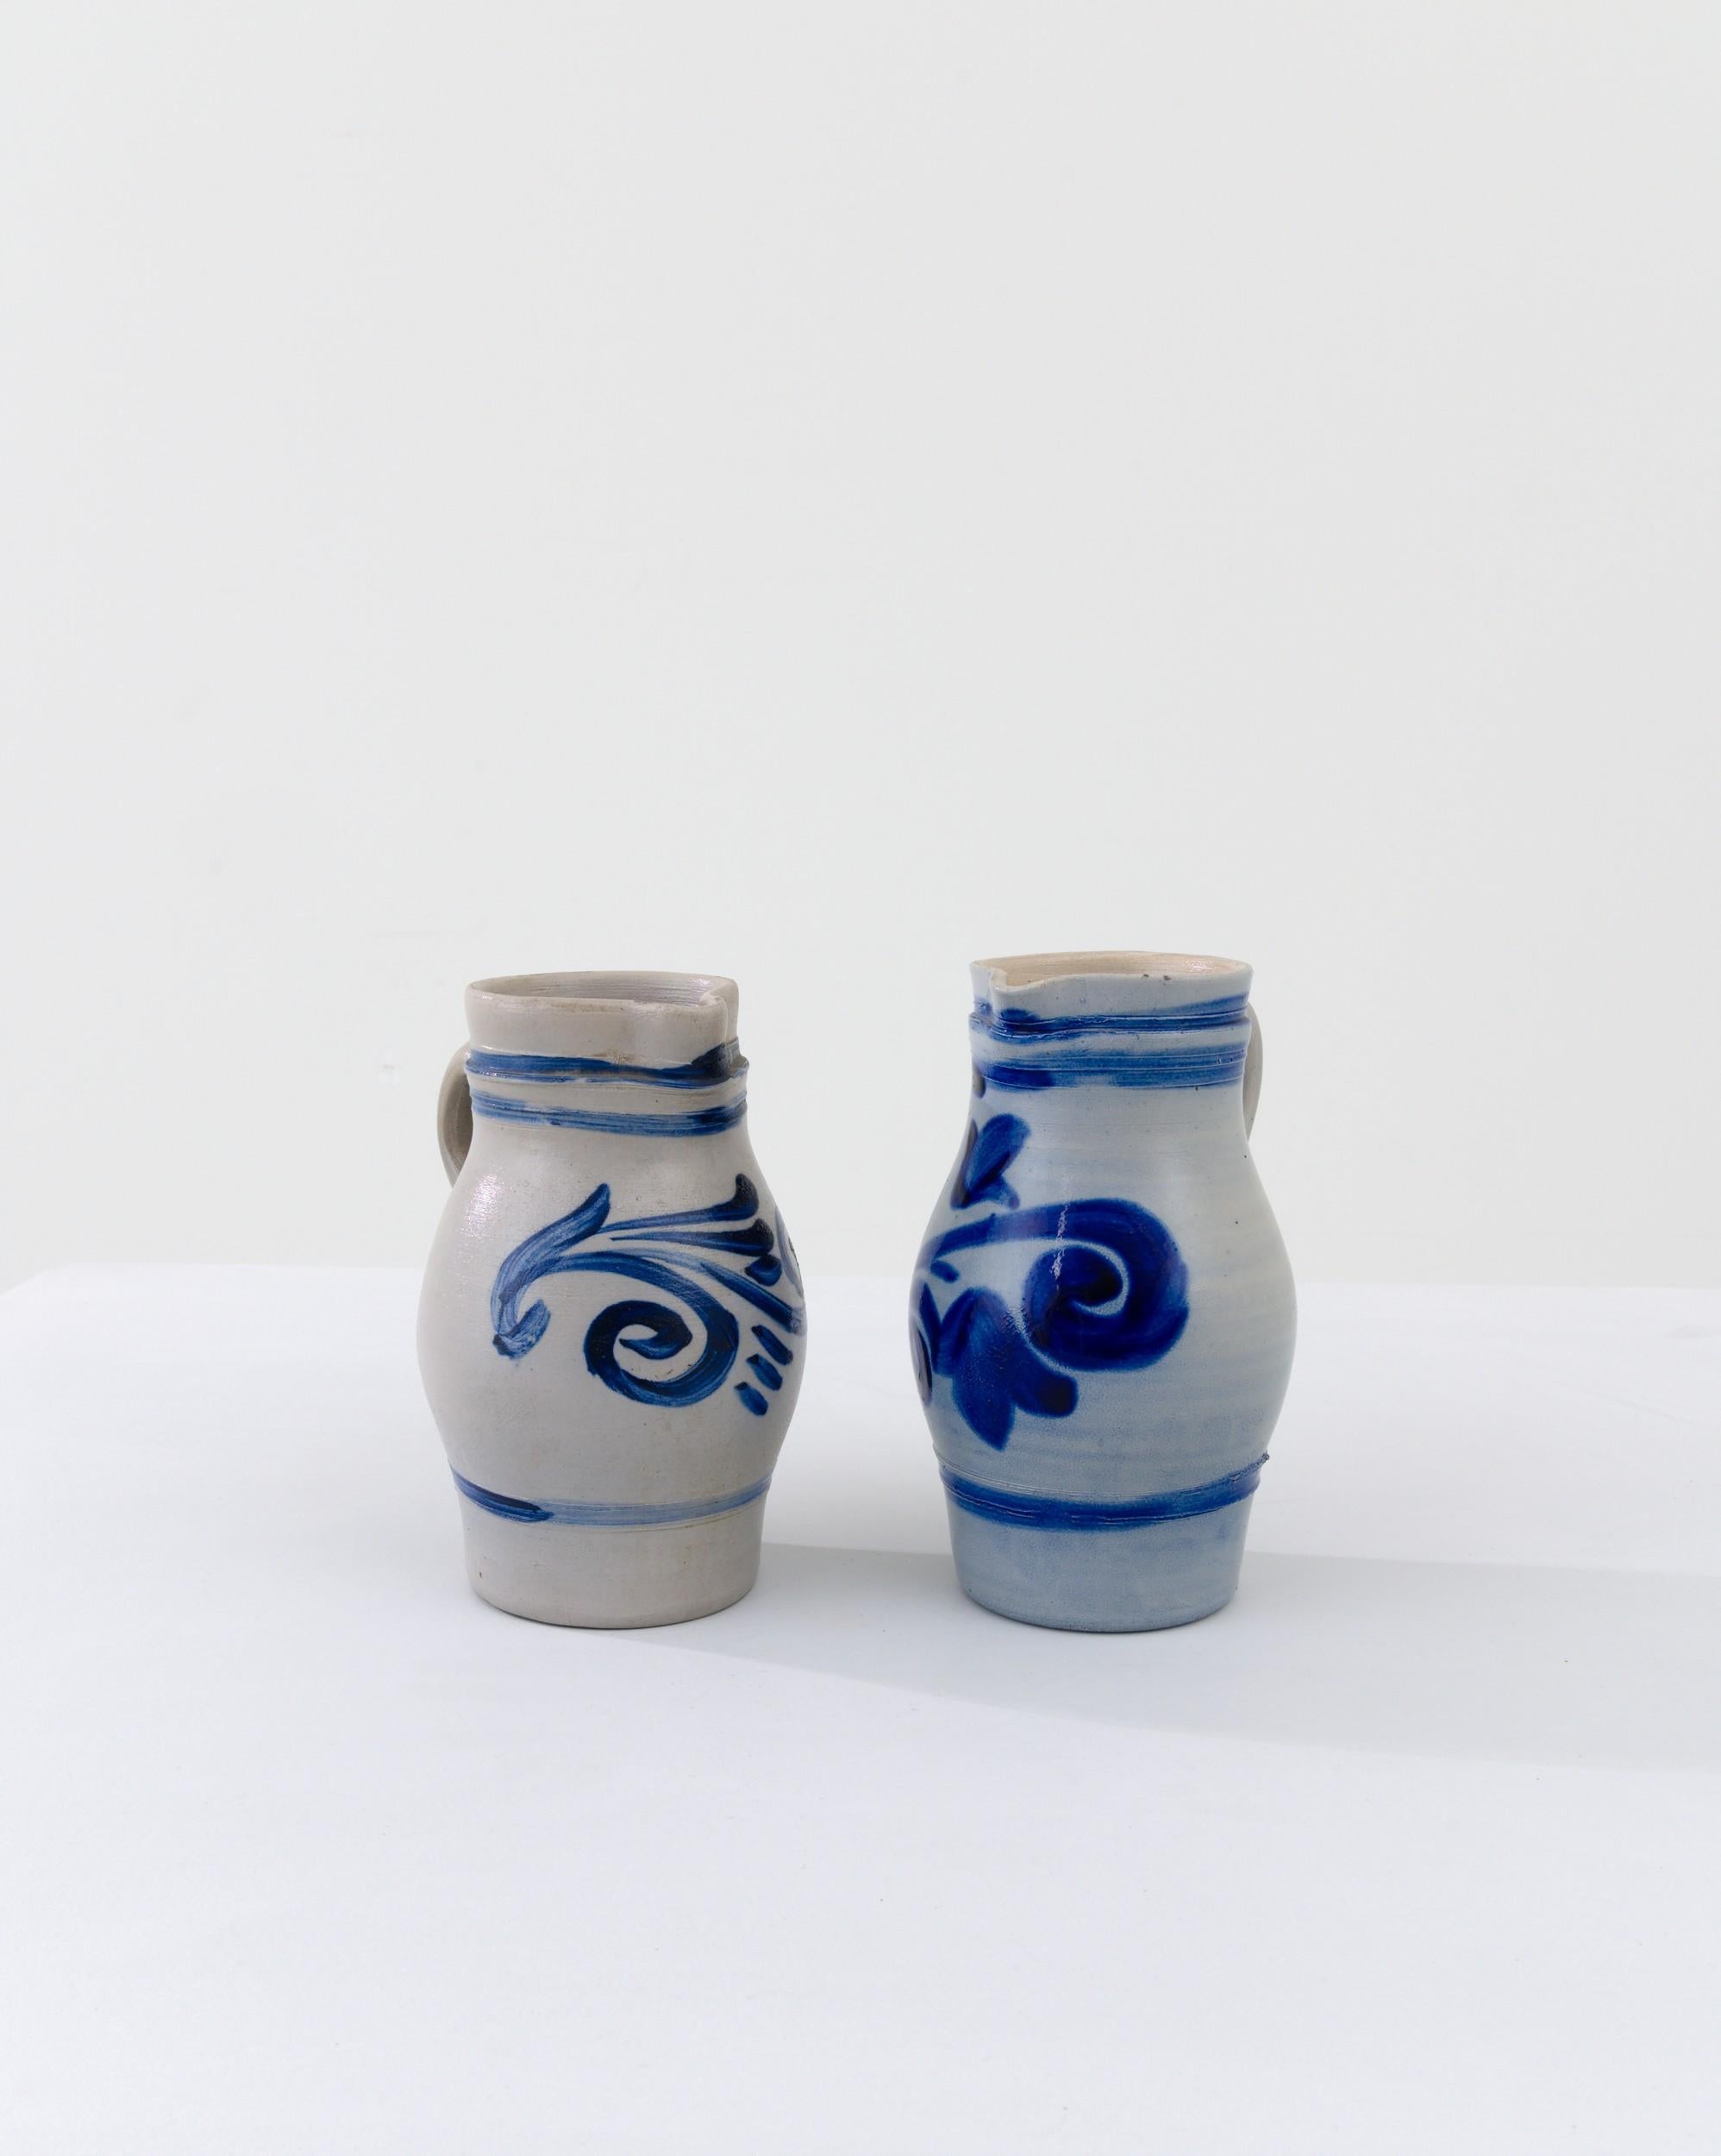 This pair of typical country pots is finished with a distinctive vivid blue salt glaze, enhancing the rounded clay base with a charming nature inspired motif. The dominant form of storage for food or agricultural purposes for thousands of years,